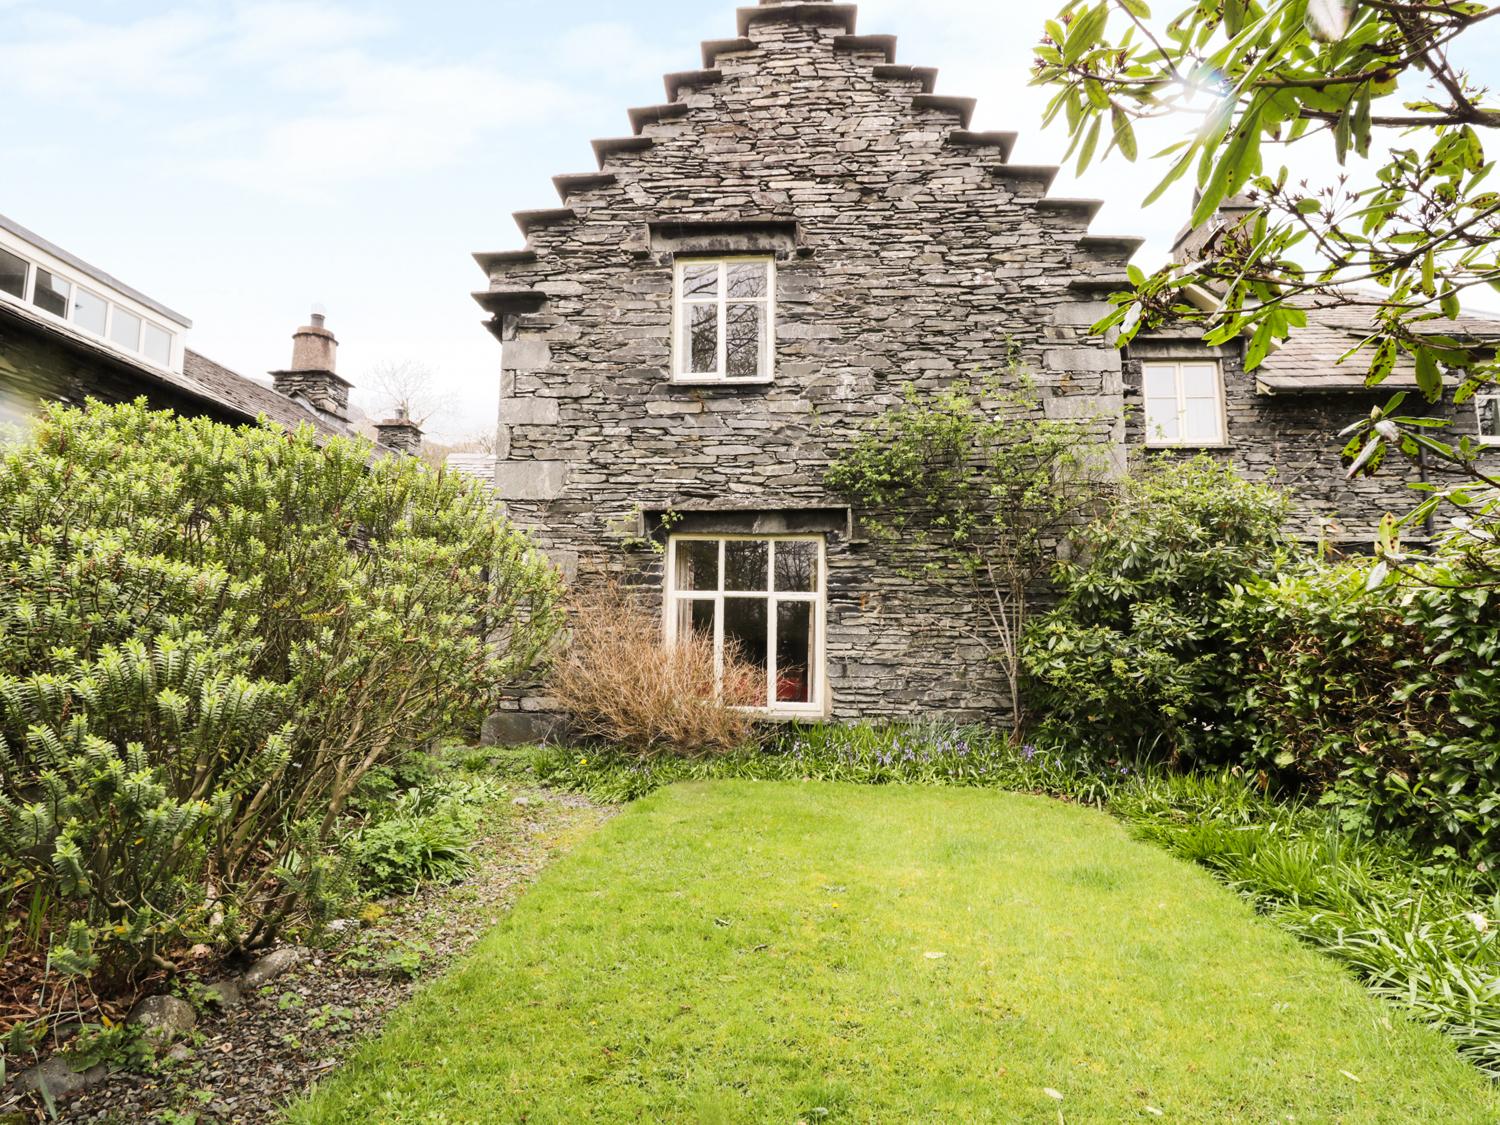 Melbourne House Coniston Cumbria Holiday Cottage Reviews